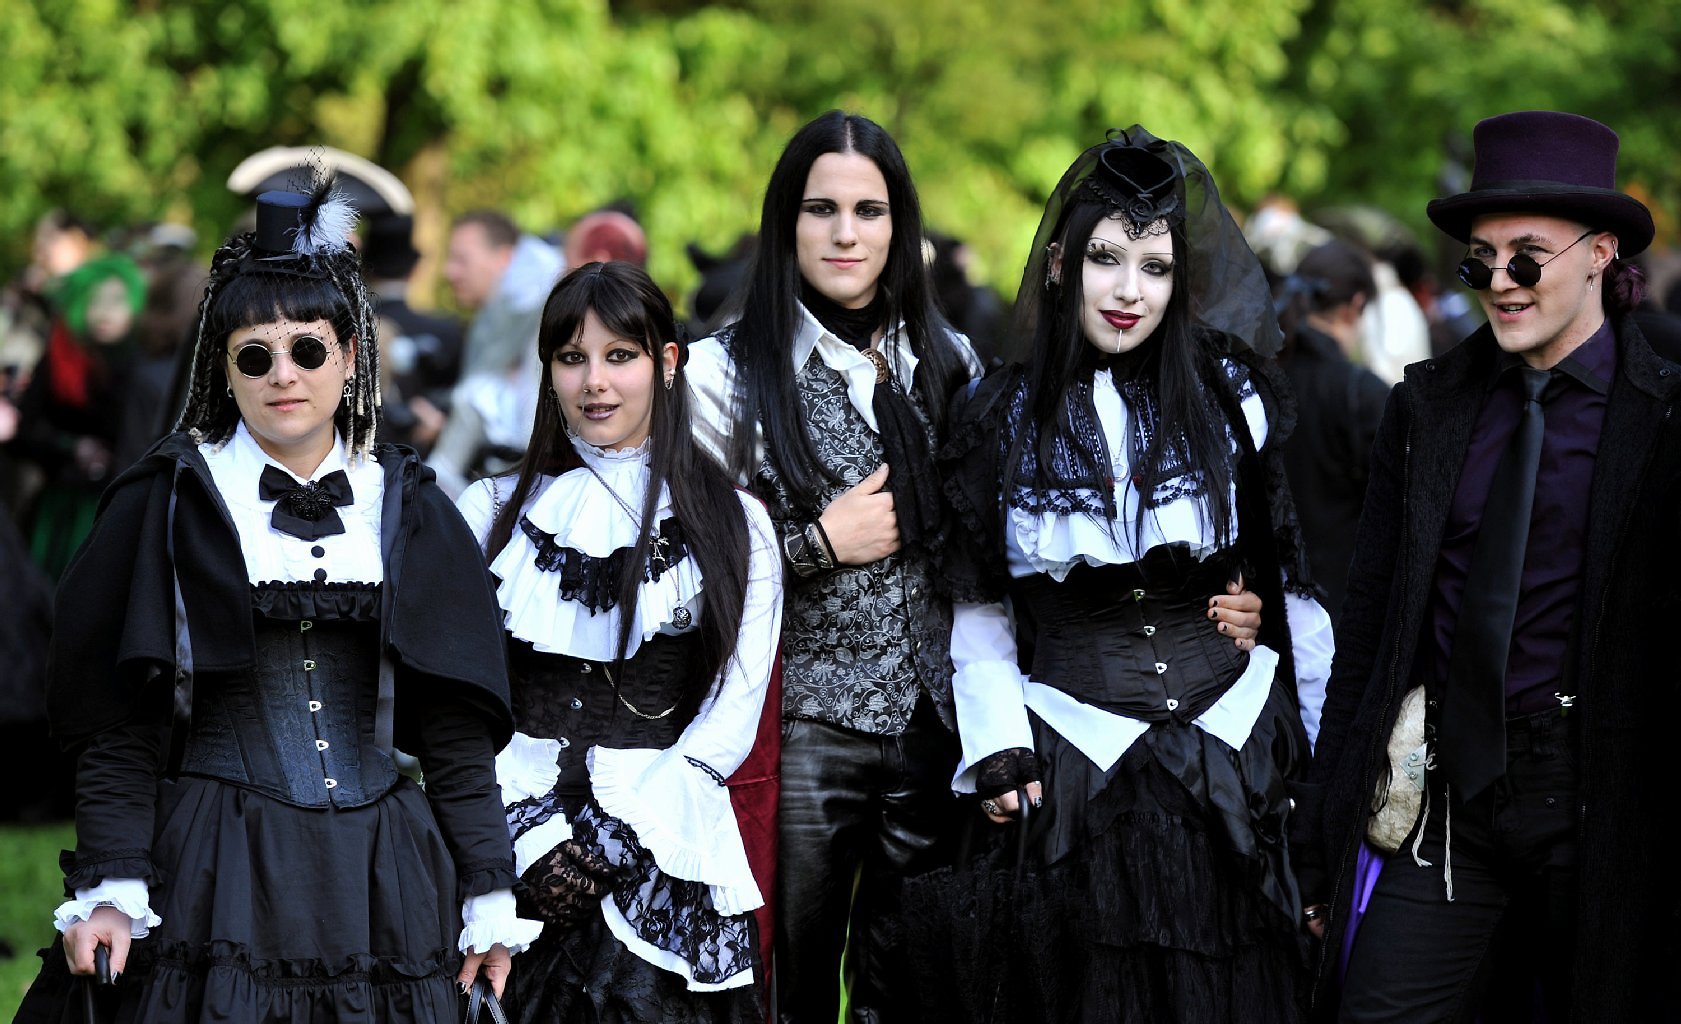 10 Festivals Celebrating The Gothic Subculture - Sherpa Land